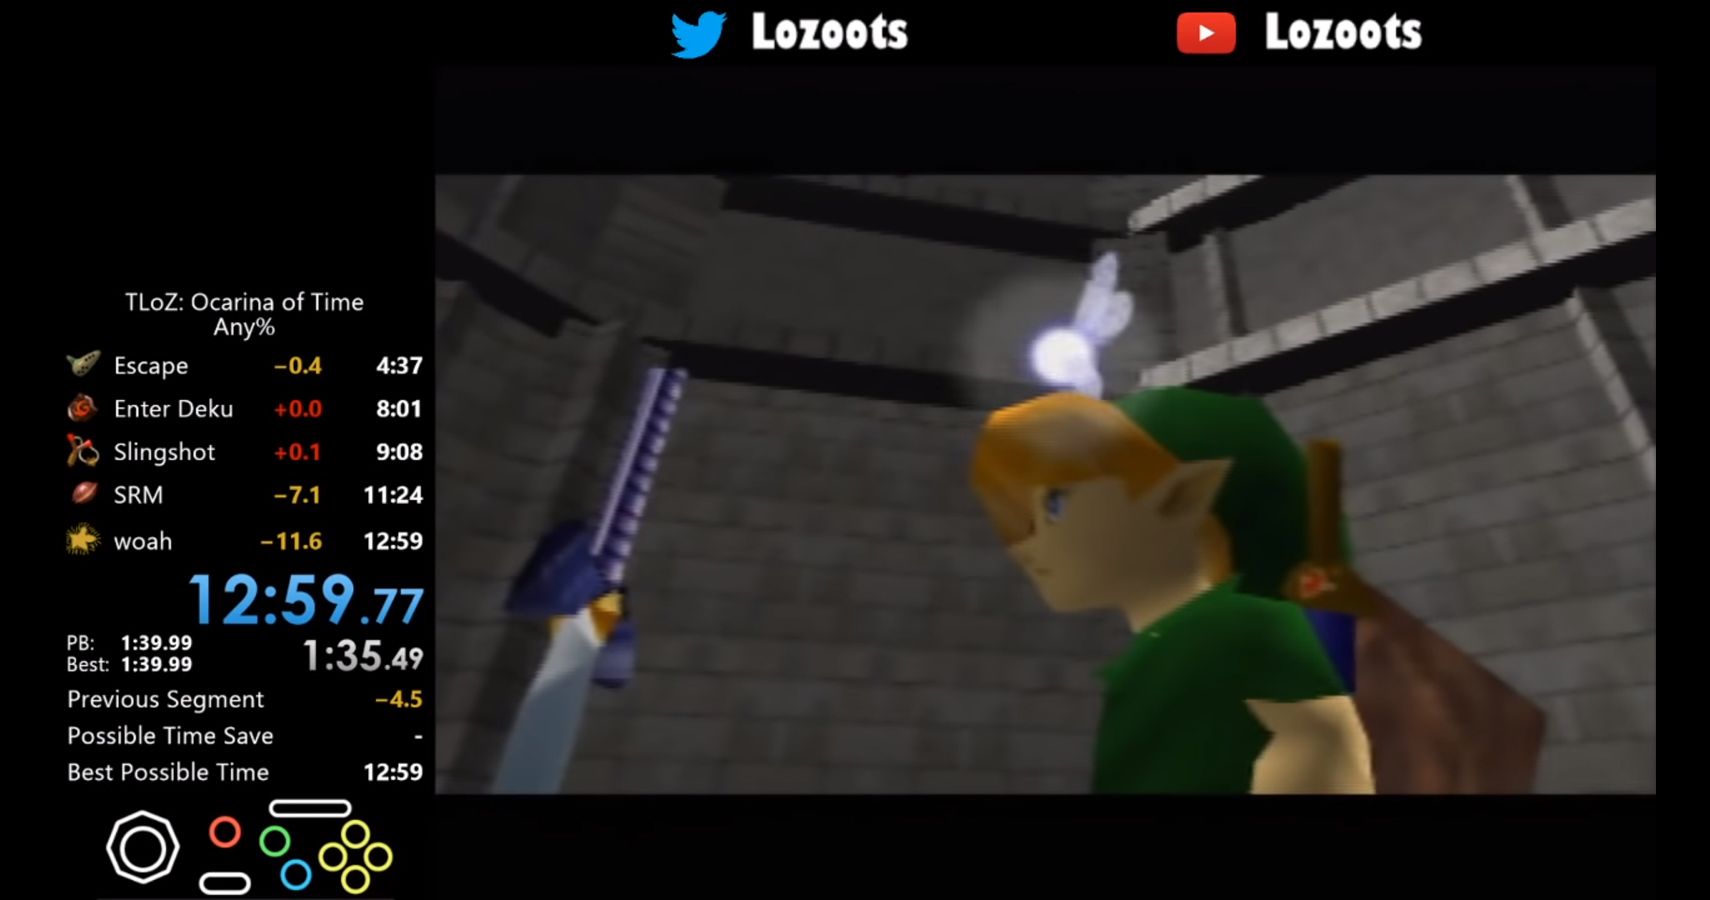 Ocarina Of Time Can Now Be Beaten In Under 13 Minutes Thanks To New Speedrunning Trick